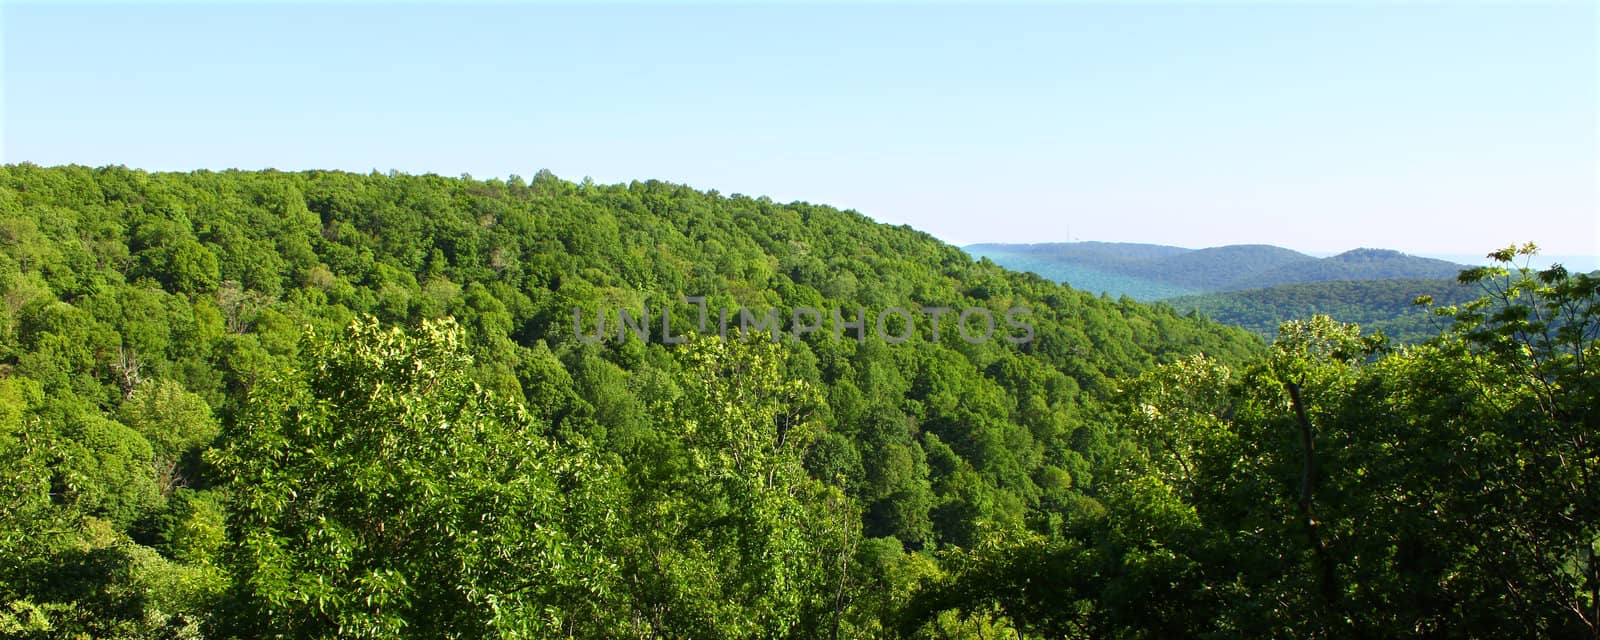 The vast forested lands of Monte Sano State Park in Alabama.